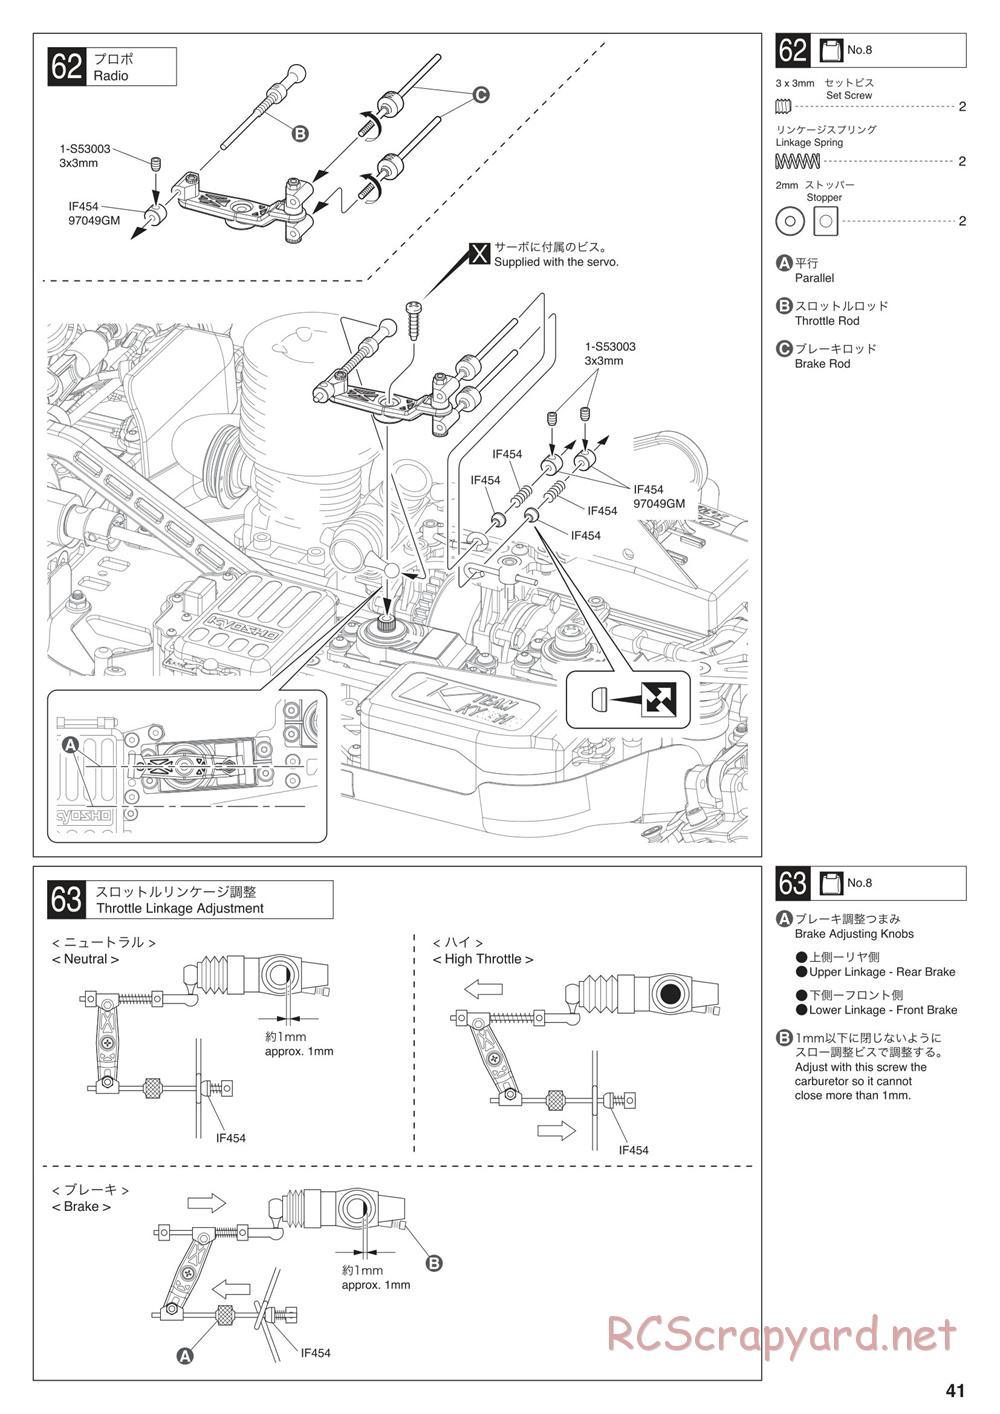 Kyosho - Inferno MP10 - Manual - Page 41